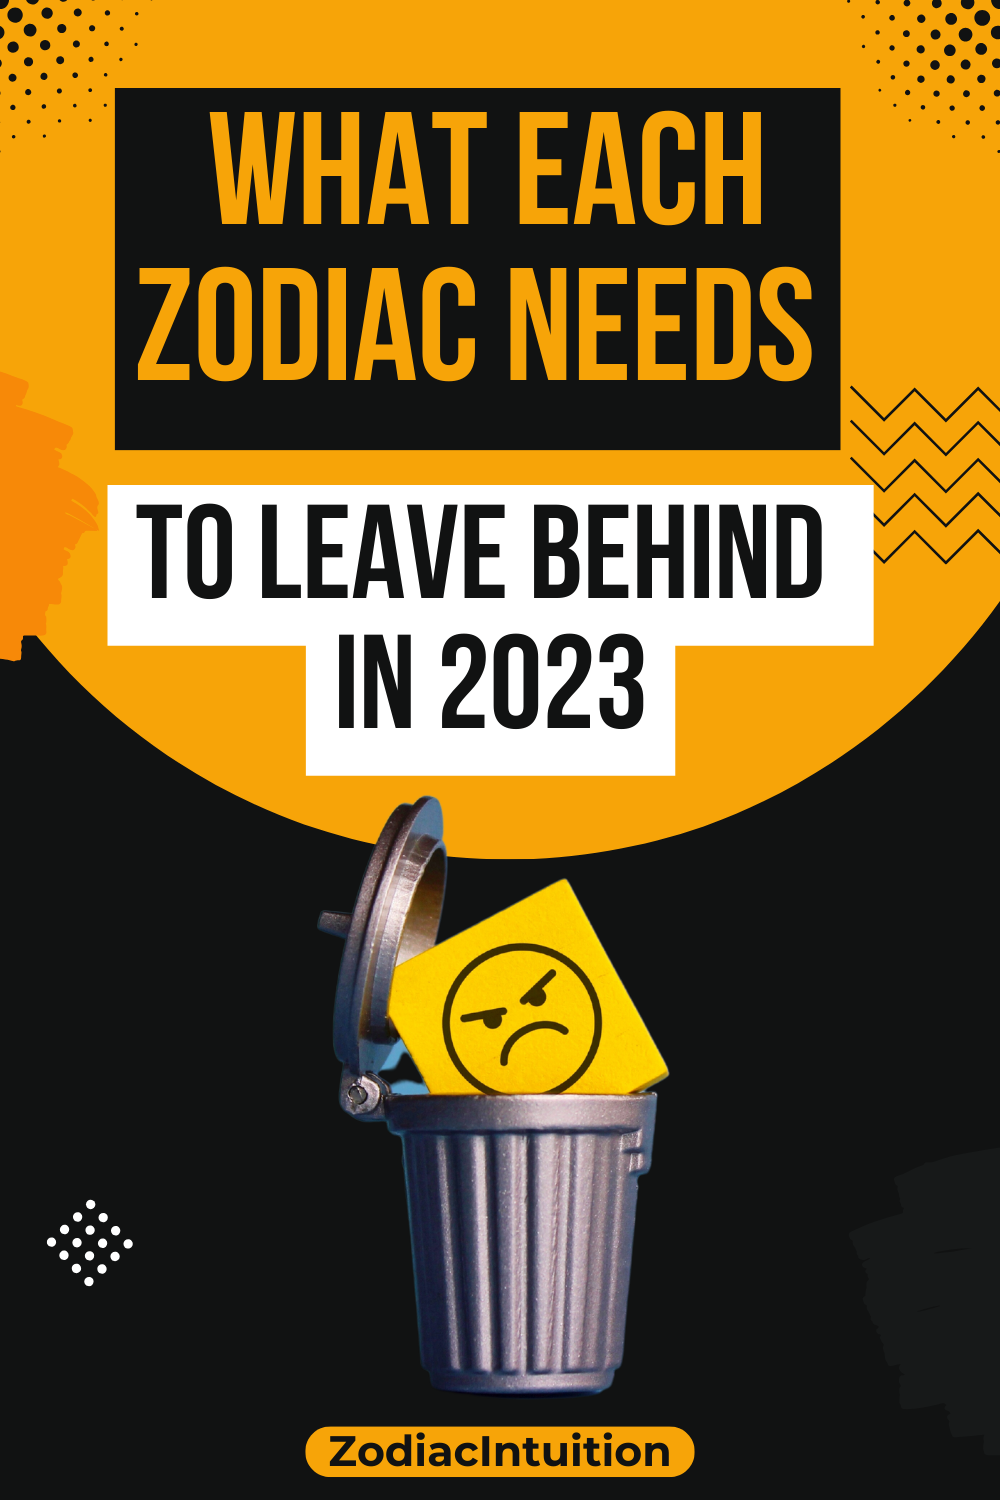 What Each Zodiac Needs To Leave Behind In 2023